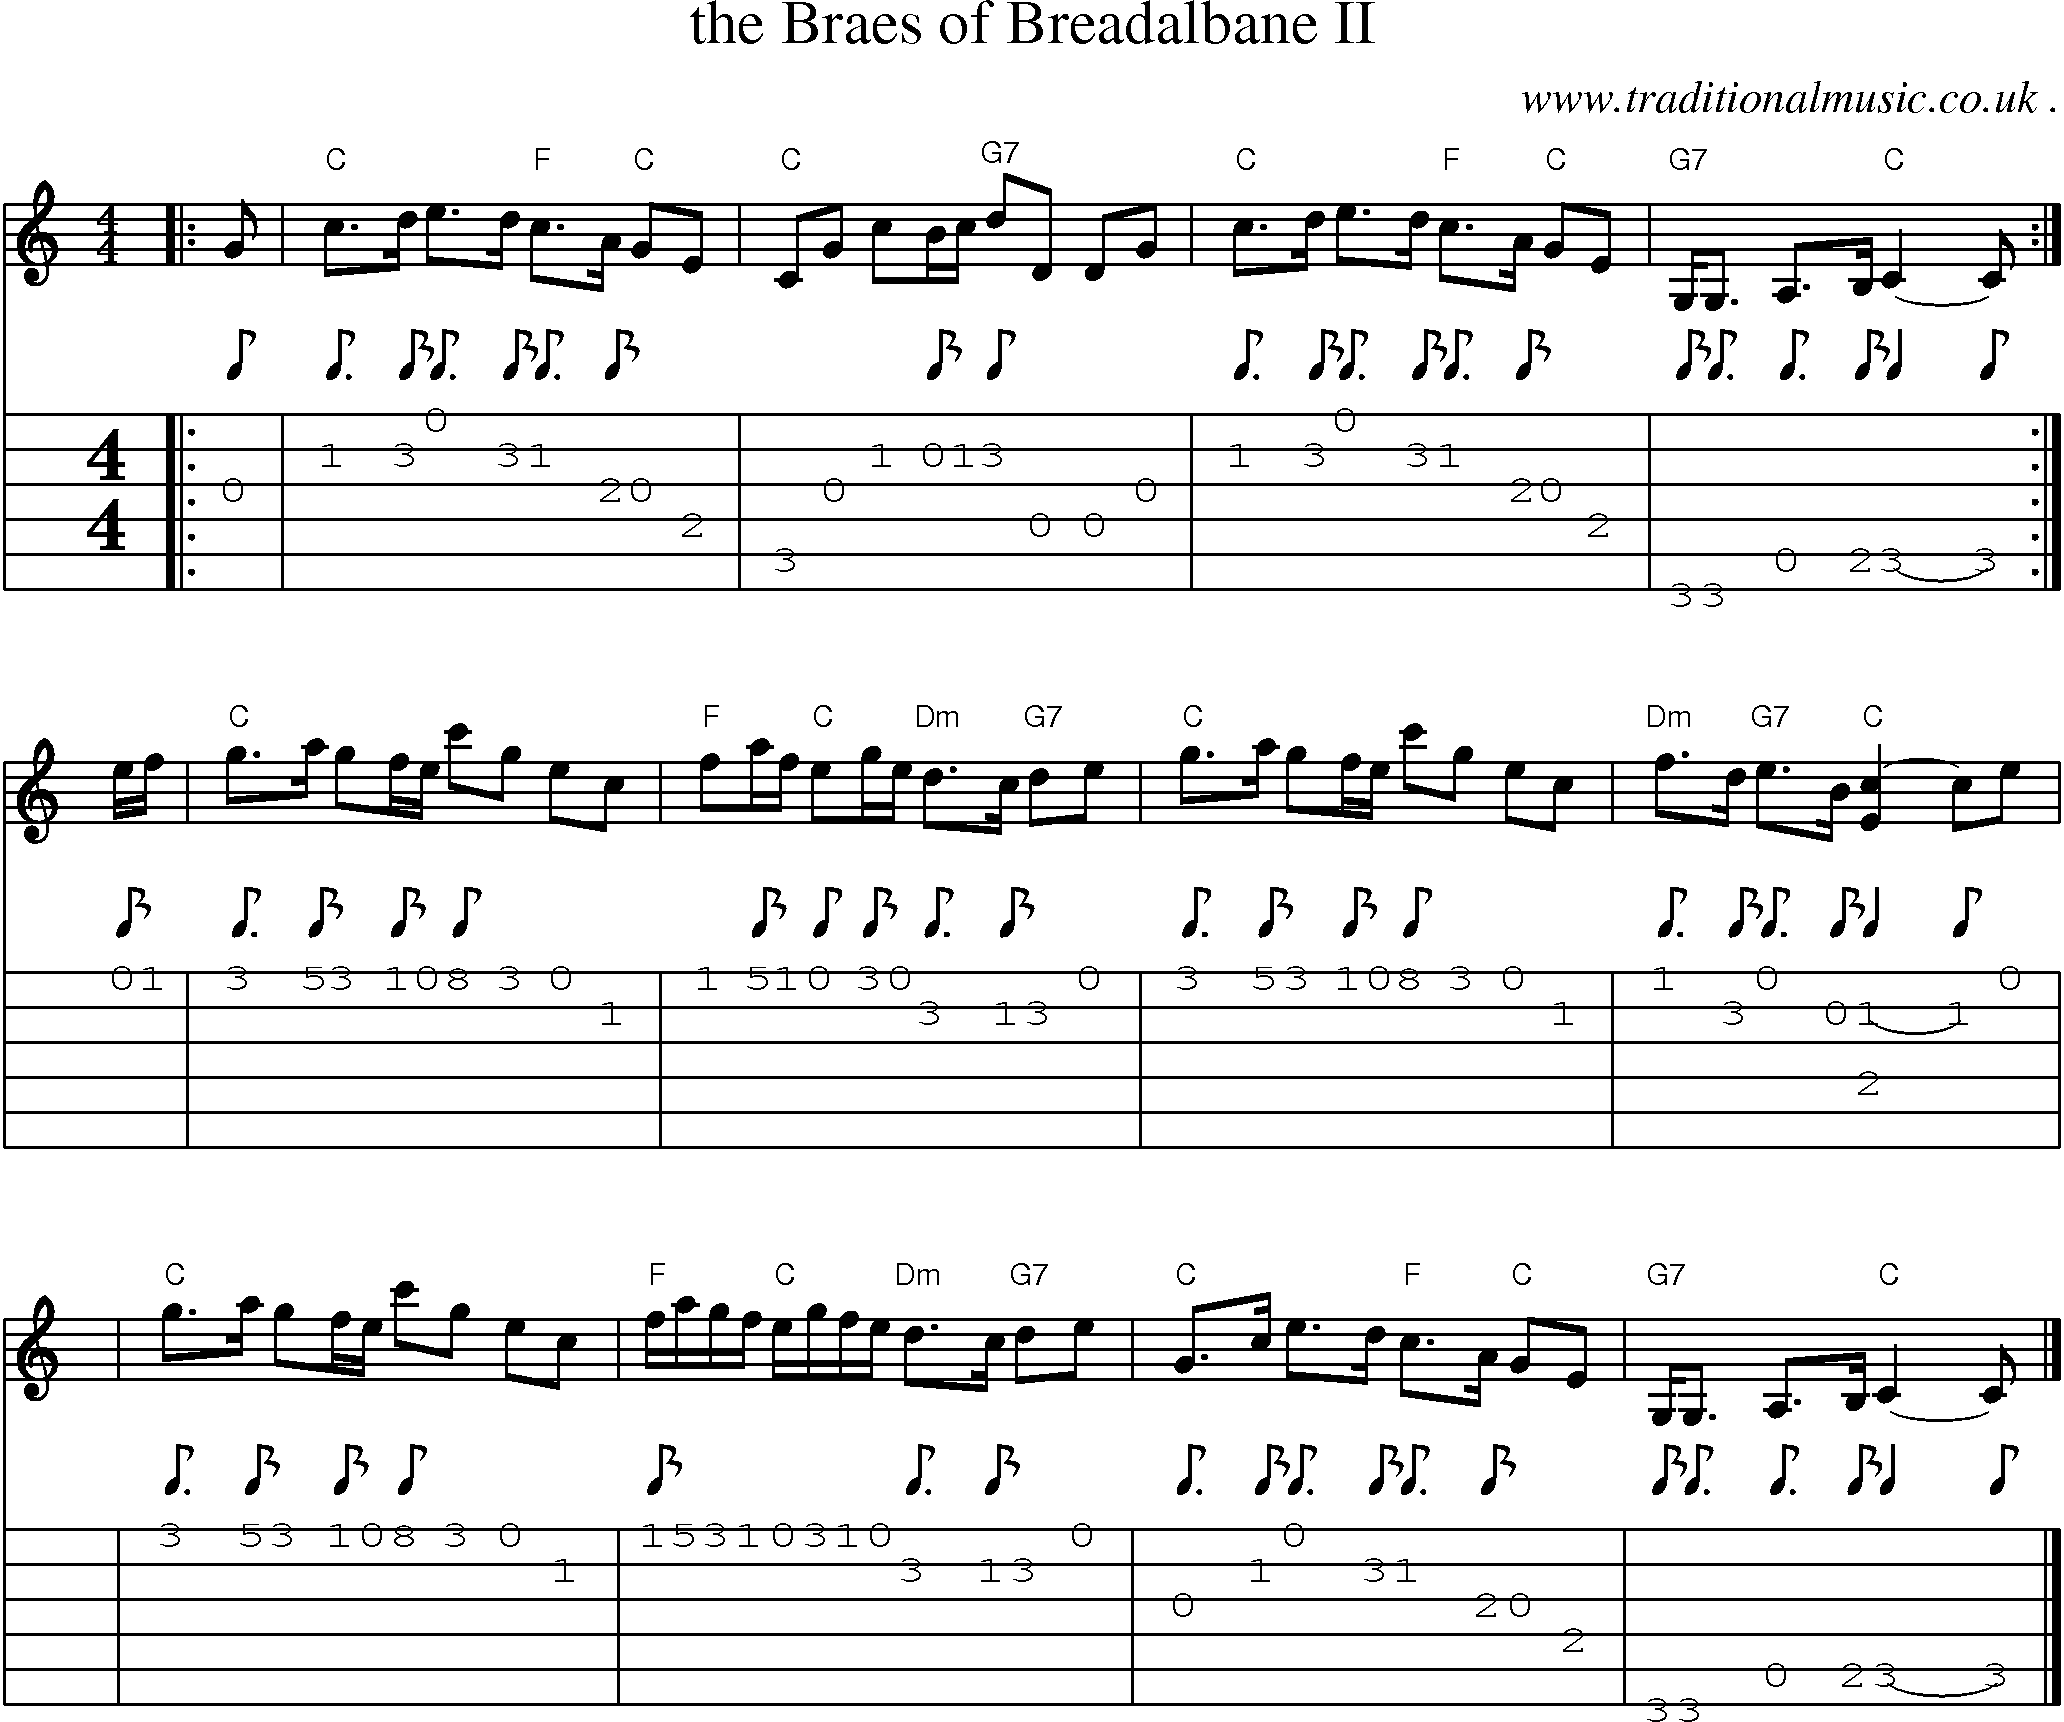 Sheet-music  score, Chords and Guitar Tabs for The Braes Of Breadalbane Ii